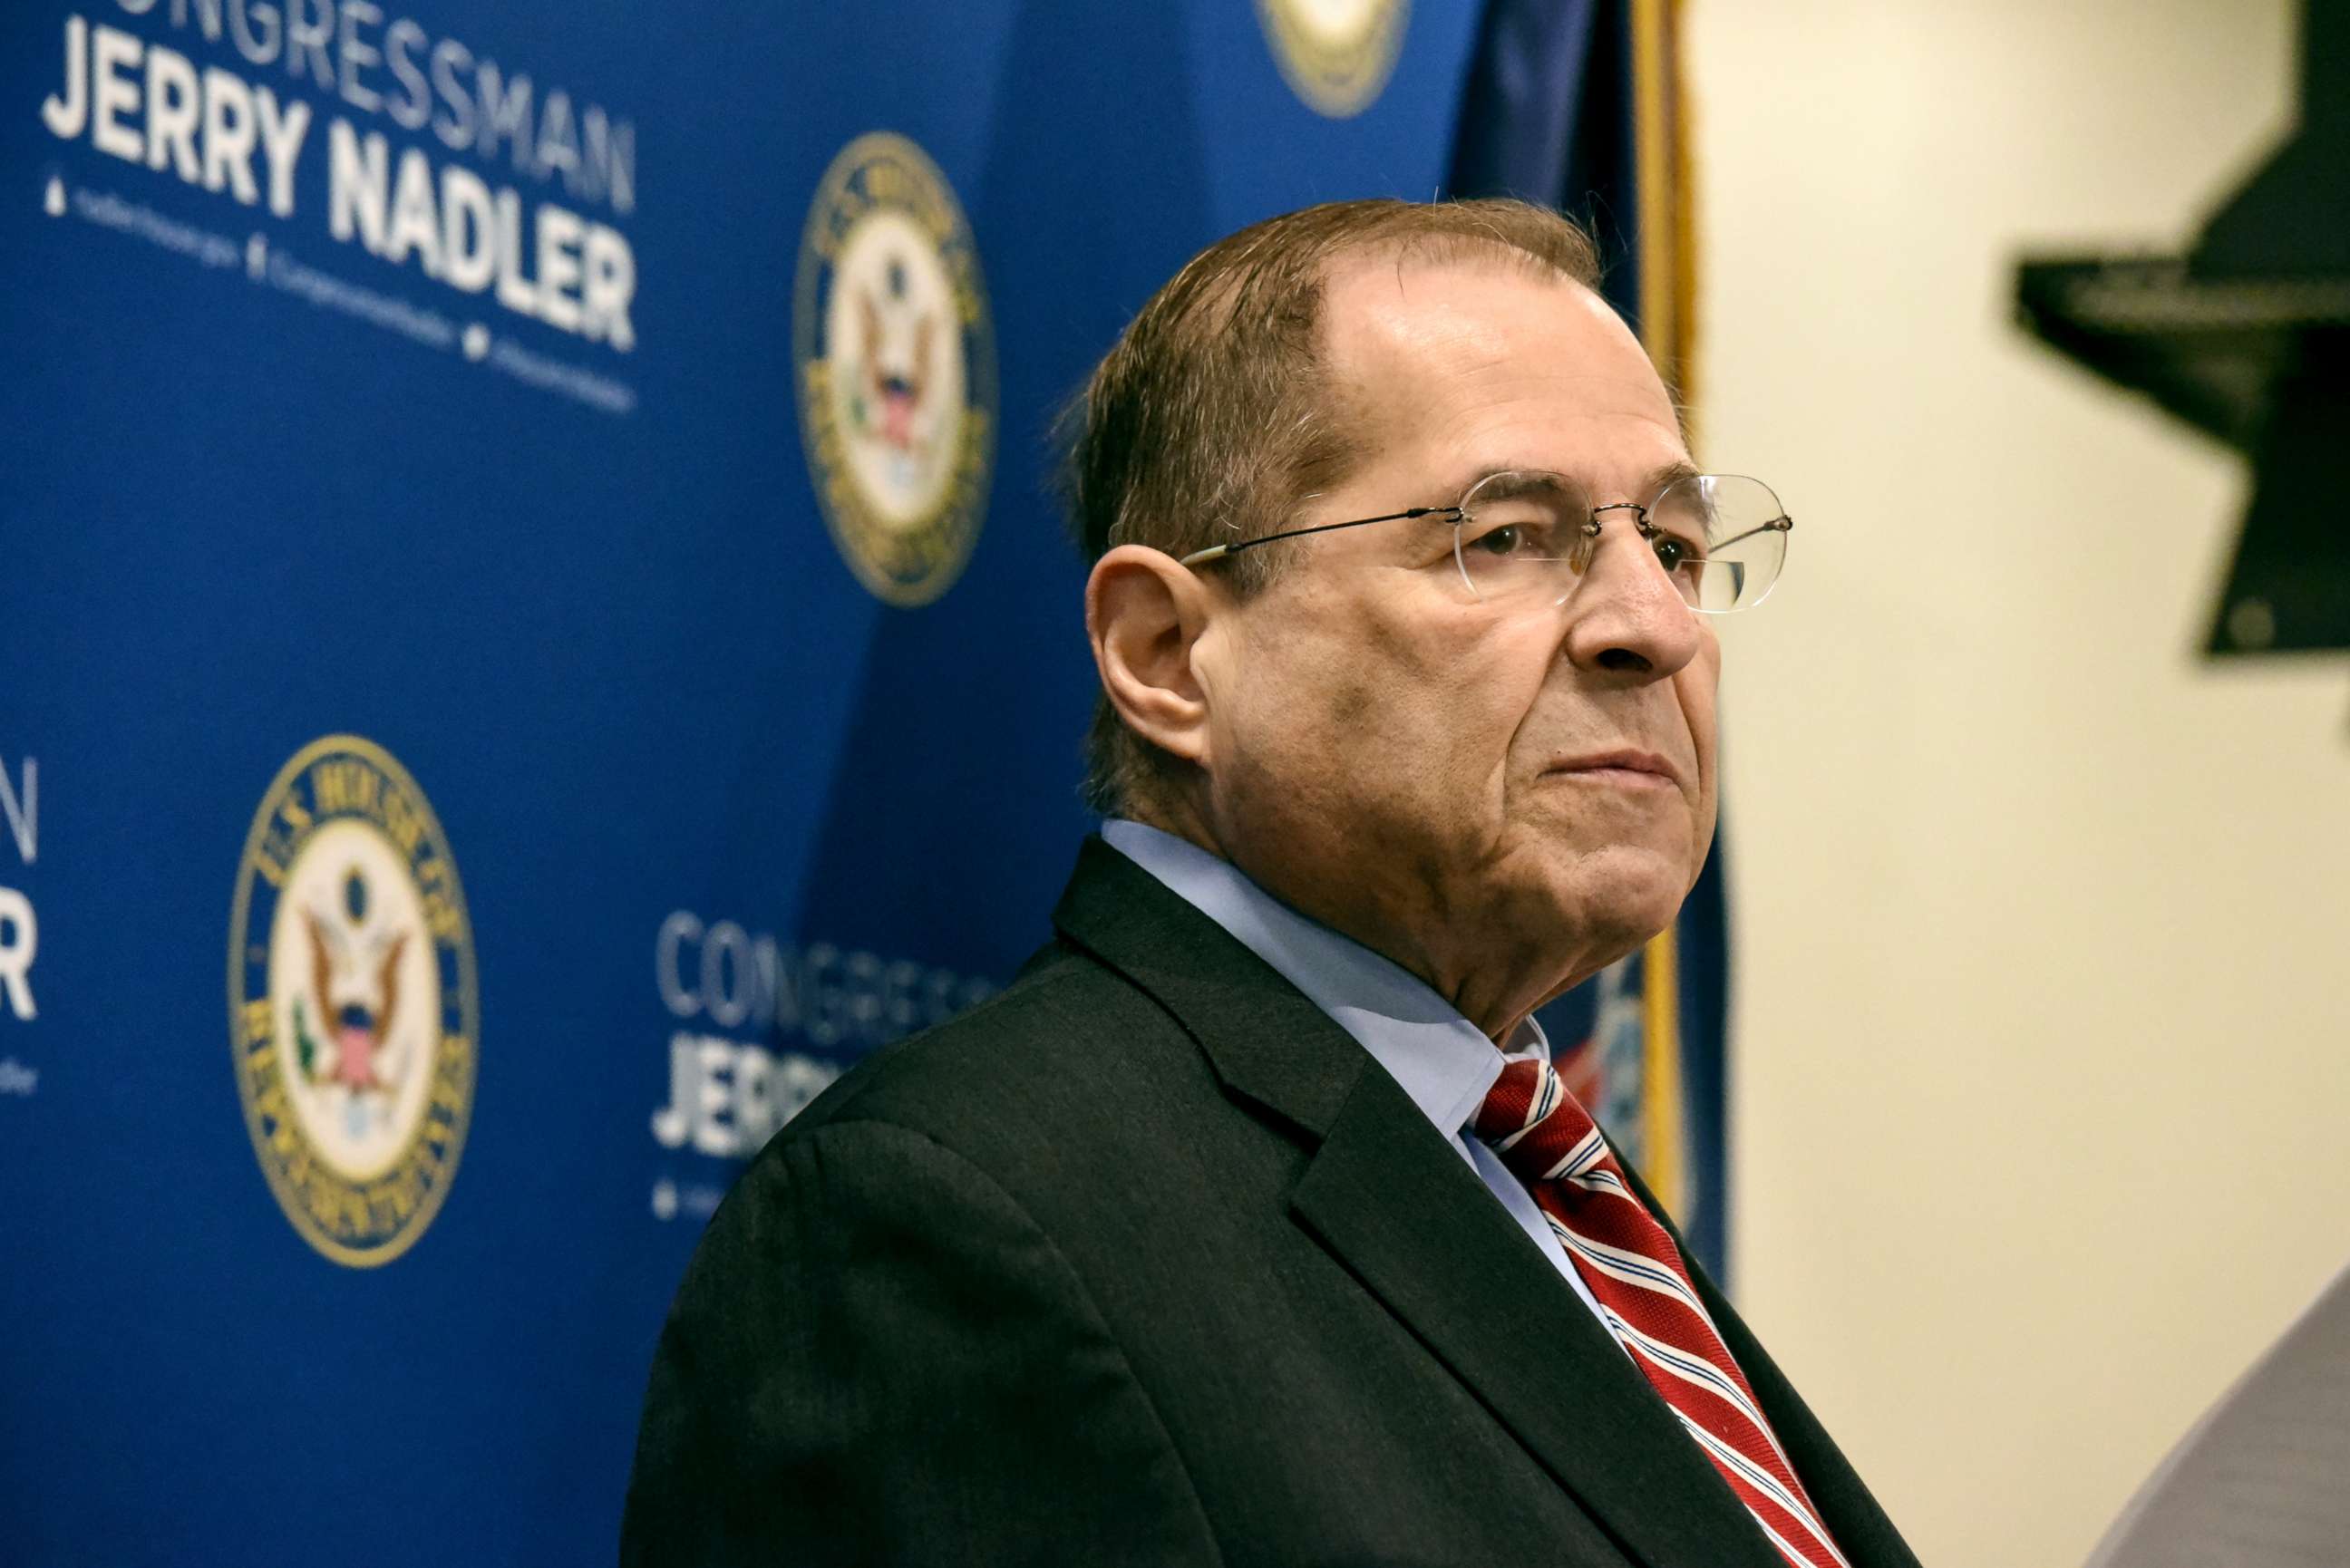 PHOTO: Rep. Jerry Nadler speaks to members of the press, May 29, 2019, in New York City.